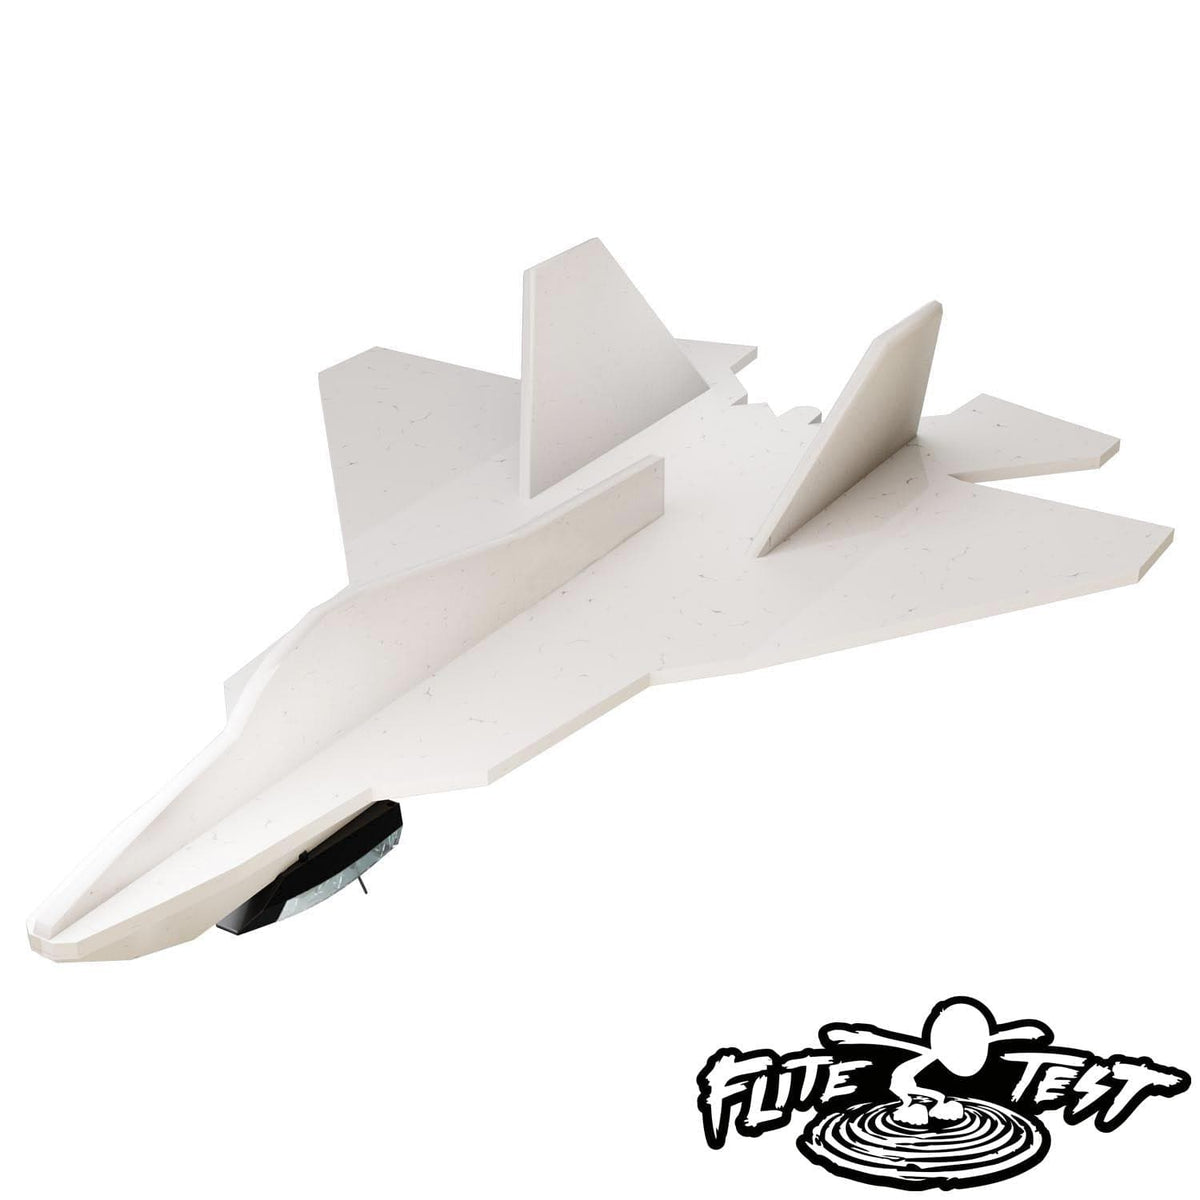 F22 RAPTOR® WITH POWERUP 4.0 AIRPLANE